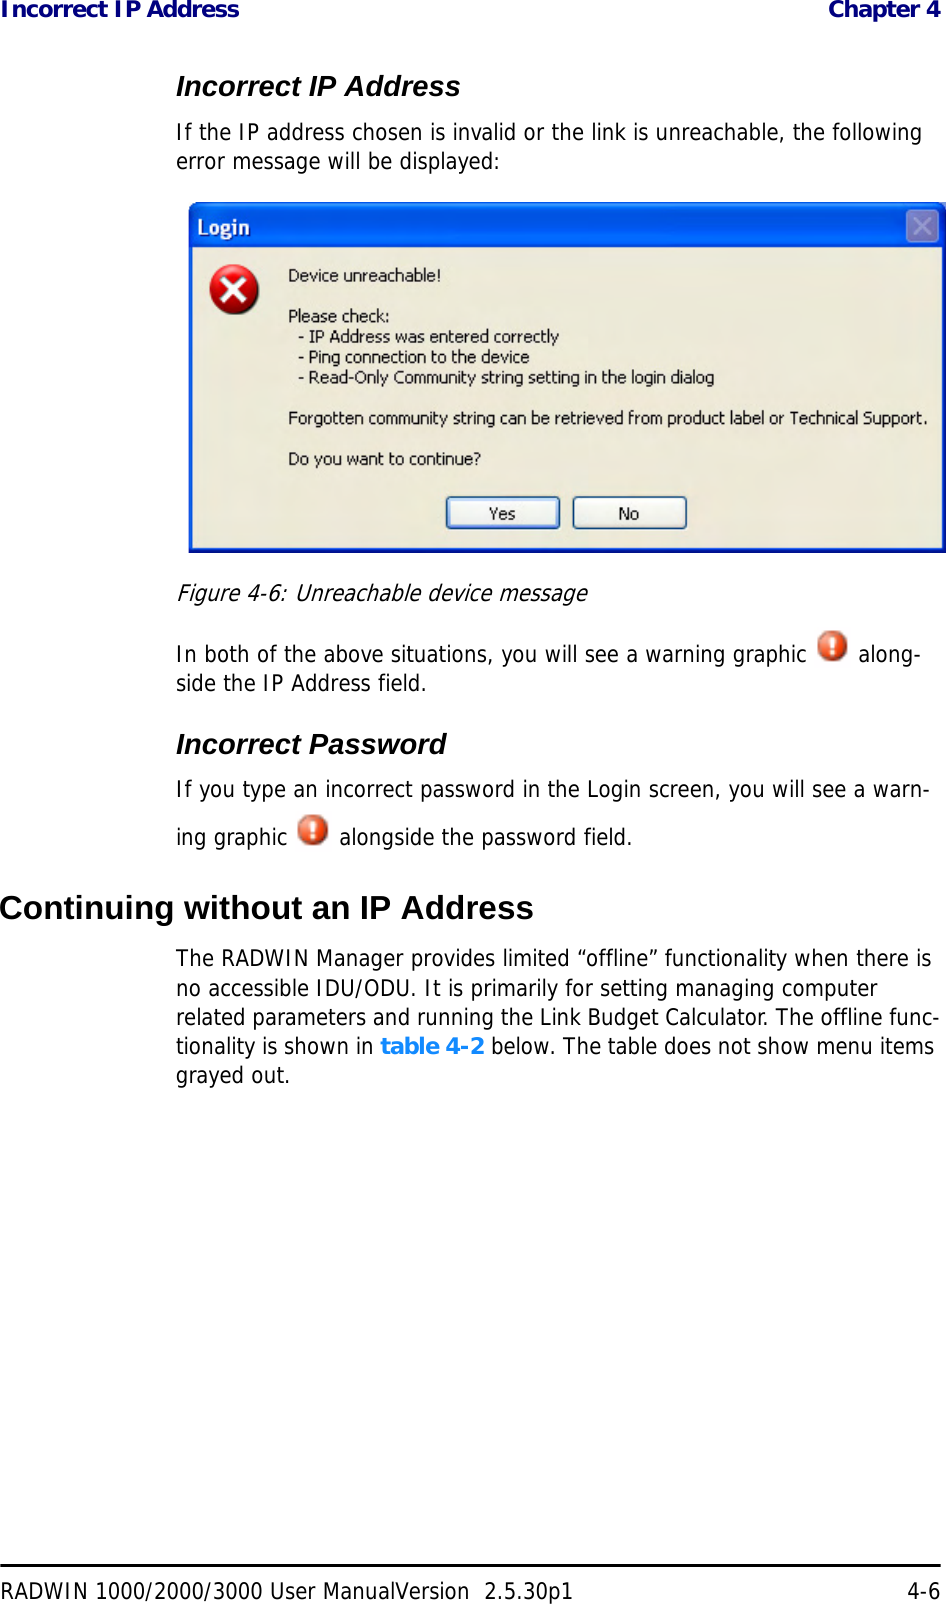 Incorrect IP Address  Chapter 4RADWIN 1000/2000/3000 User ManualVersion  2.5.30p1 4-6Incorrect IP AddressIf the IP address chosen is invalid or the link is unreachable, the following error message will be displayed:Figure 4-6: Unreachable device messageIn both of the above situations, you will see a warning graphic   along-side the IP Address field.Incorrect PasswordIf you type an incorrect password in the Login screen, you will see a warn-ing graphic   alongside the password field.Continuing without an IP AddressThe RADWIN Manager provides limited “offline” functionality when there is no accessible IDU/ODU. It is primarily for setting managing computer related parameters and running the Link Budget Calculator. The offline func-tionality is shown in table 4-2 below. The table does not show menu items grayed out.